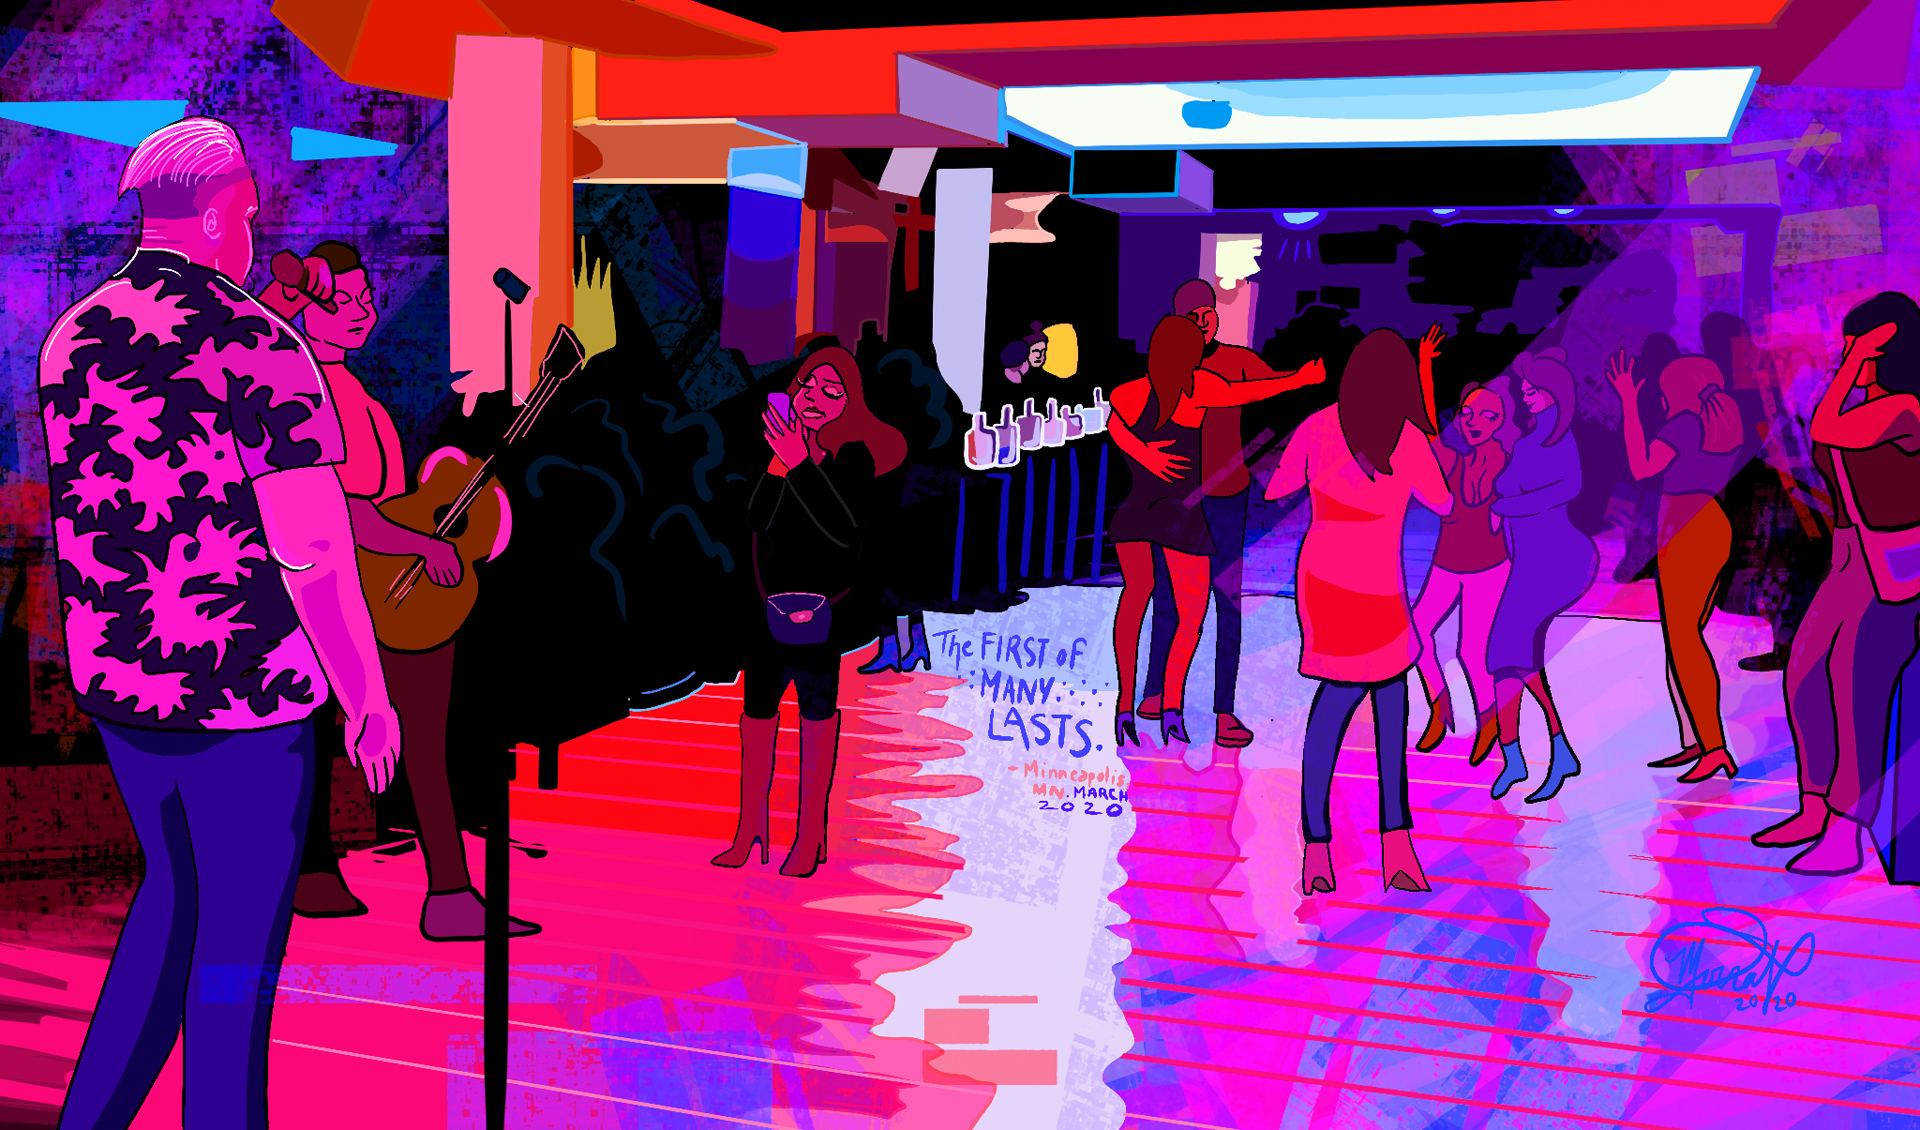 digital illustration of people gathering overlaid with intense pink and purple coloring